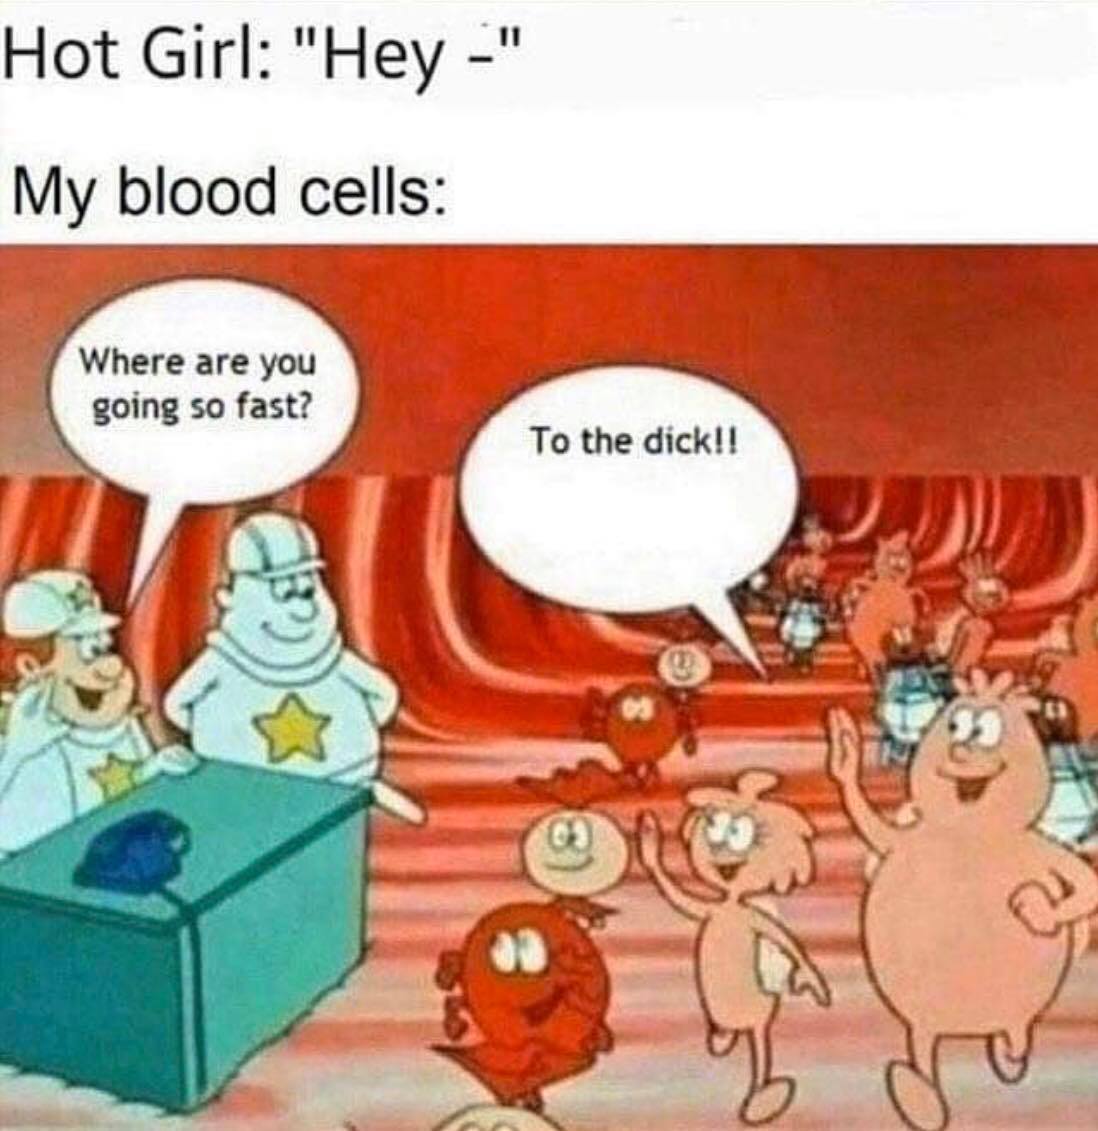 blood cells meme - Hot Girl "Hey " My blood cells Where are you going so fast? To the dick!!